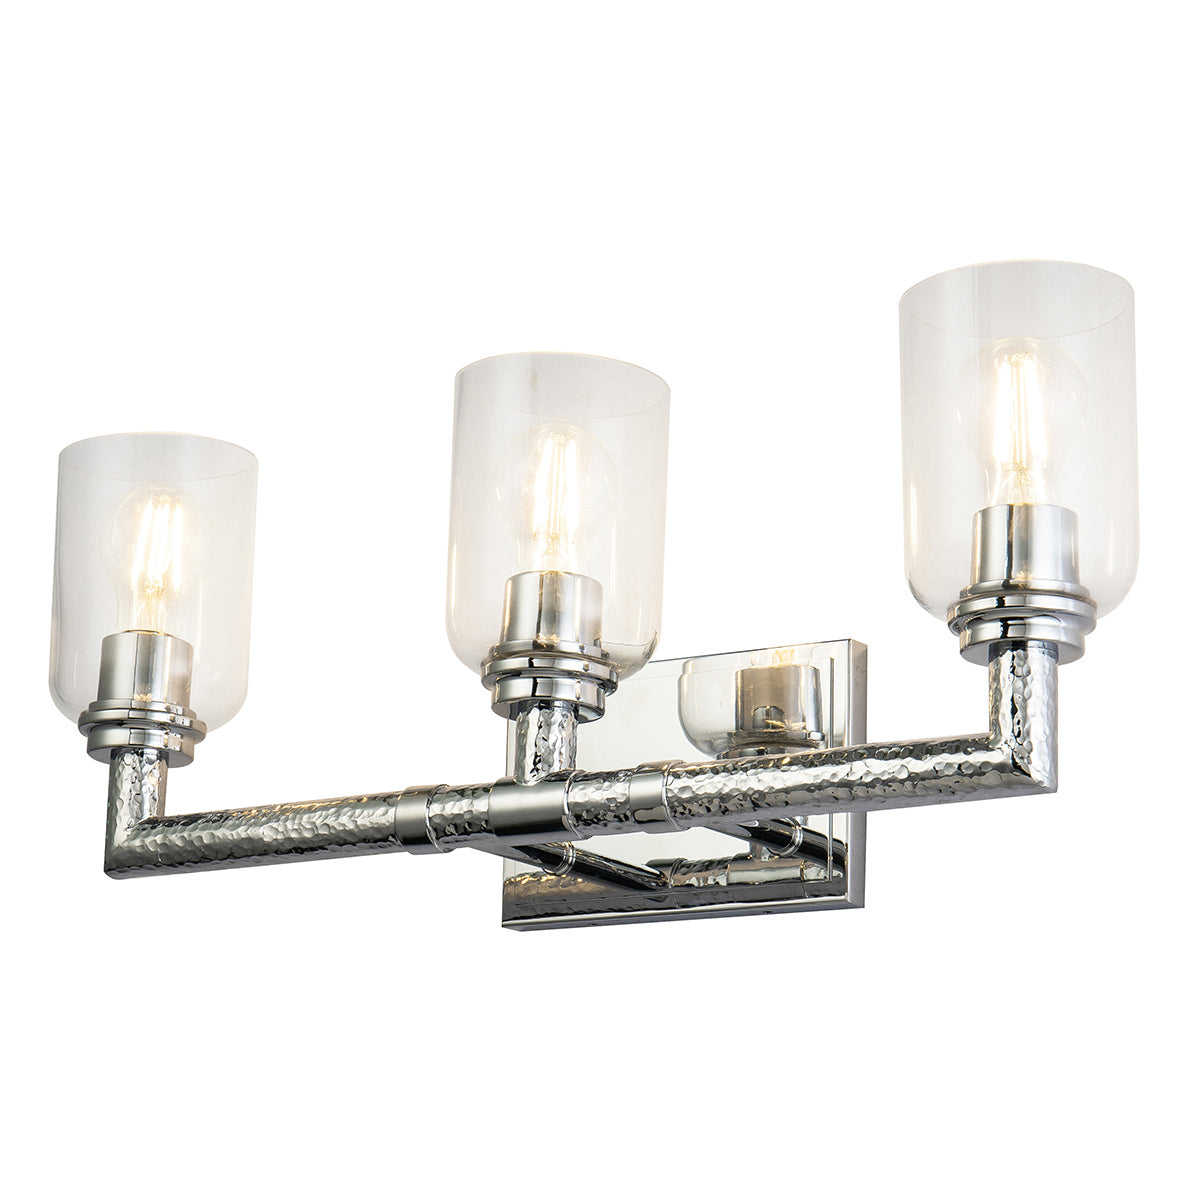 Lucas + McKearn Three Light Vanity from the Rampart collection in Polished Chrome finish